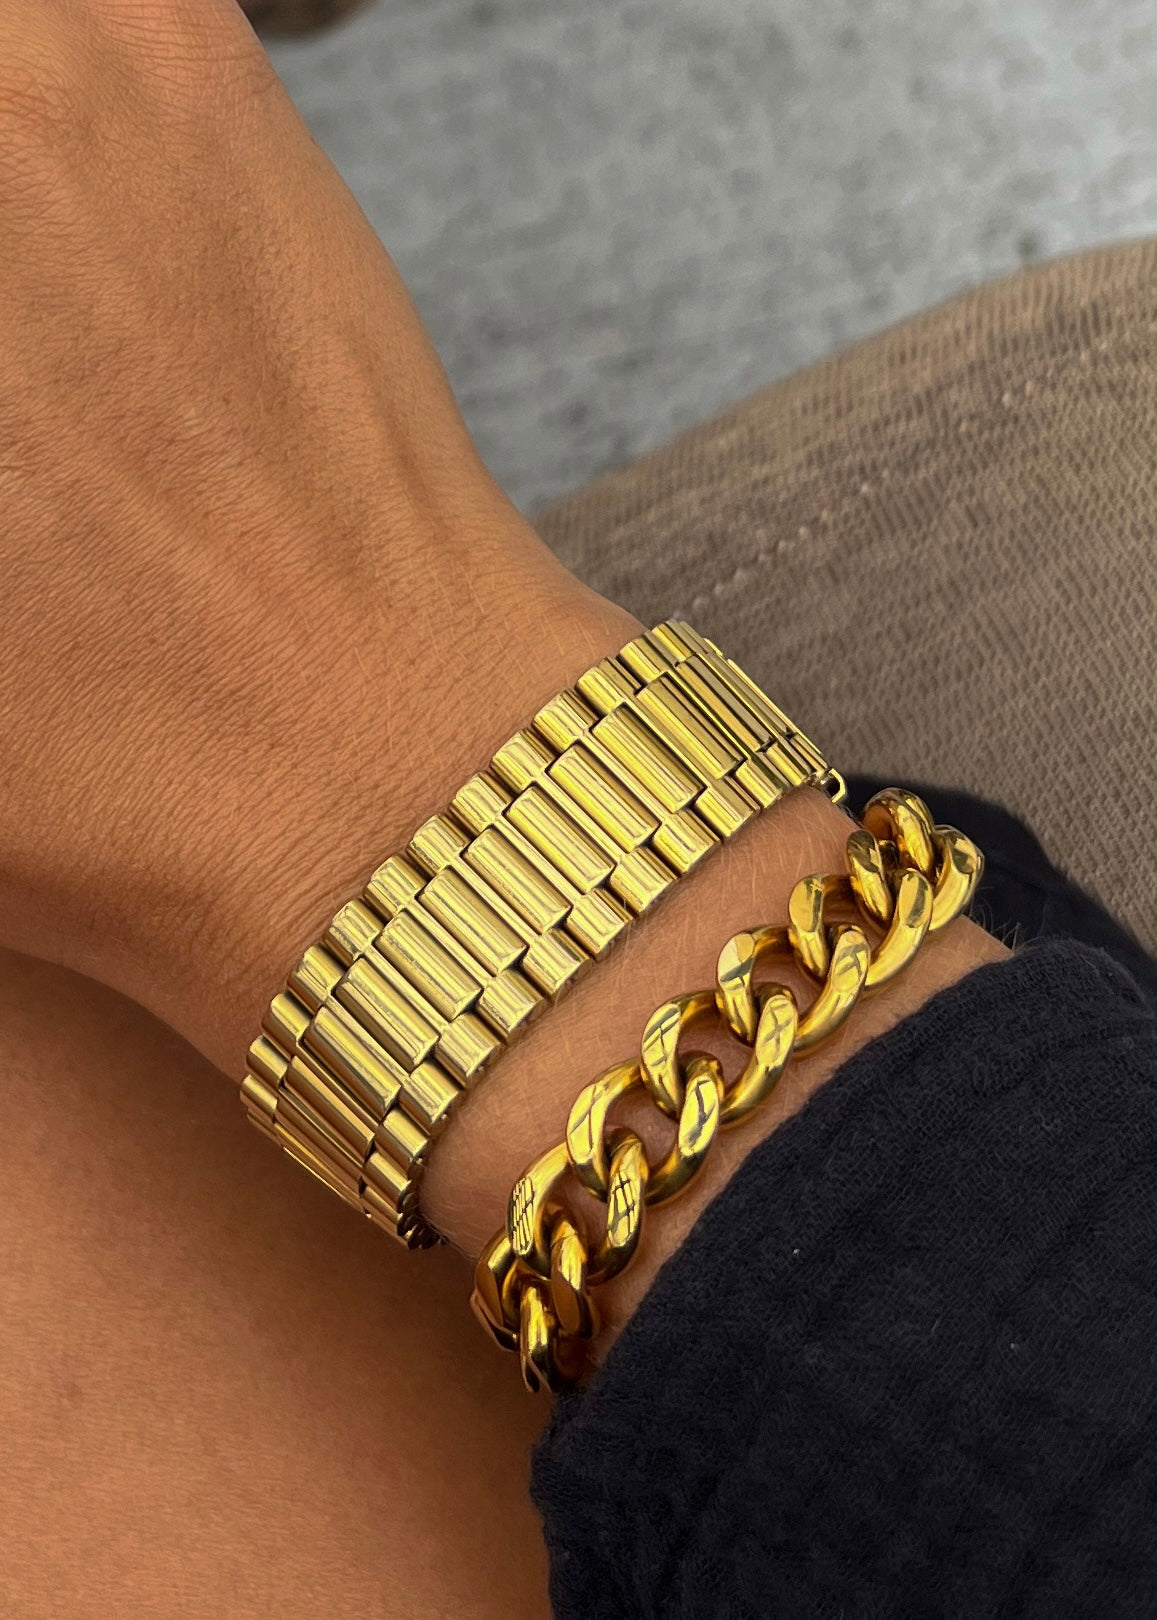 THICK GOLD WATCH BAND